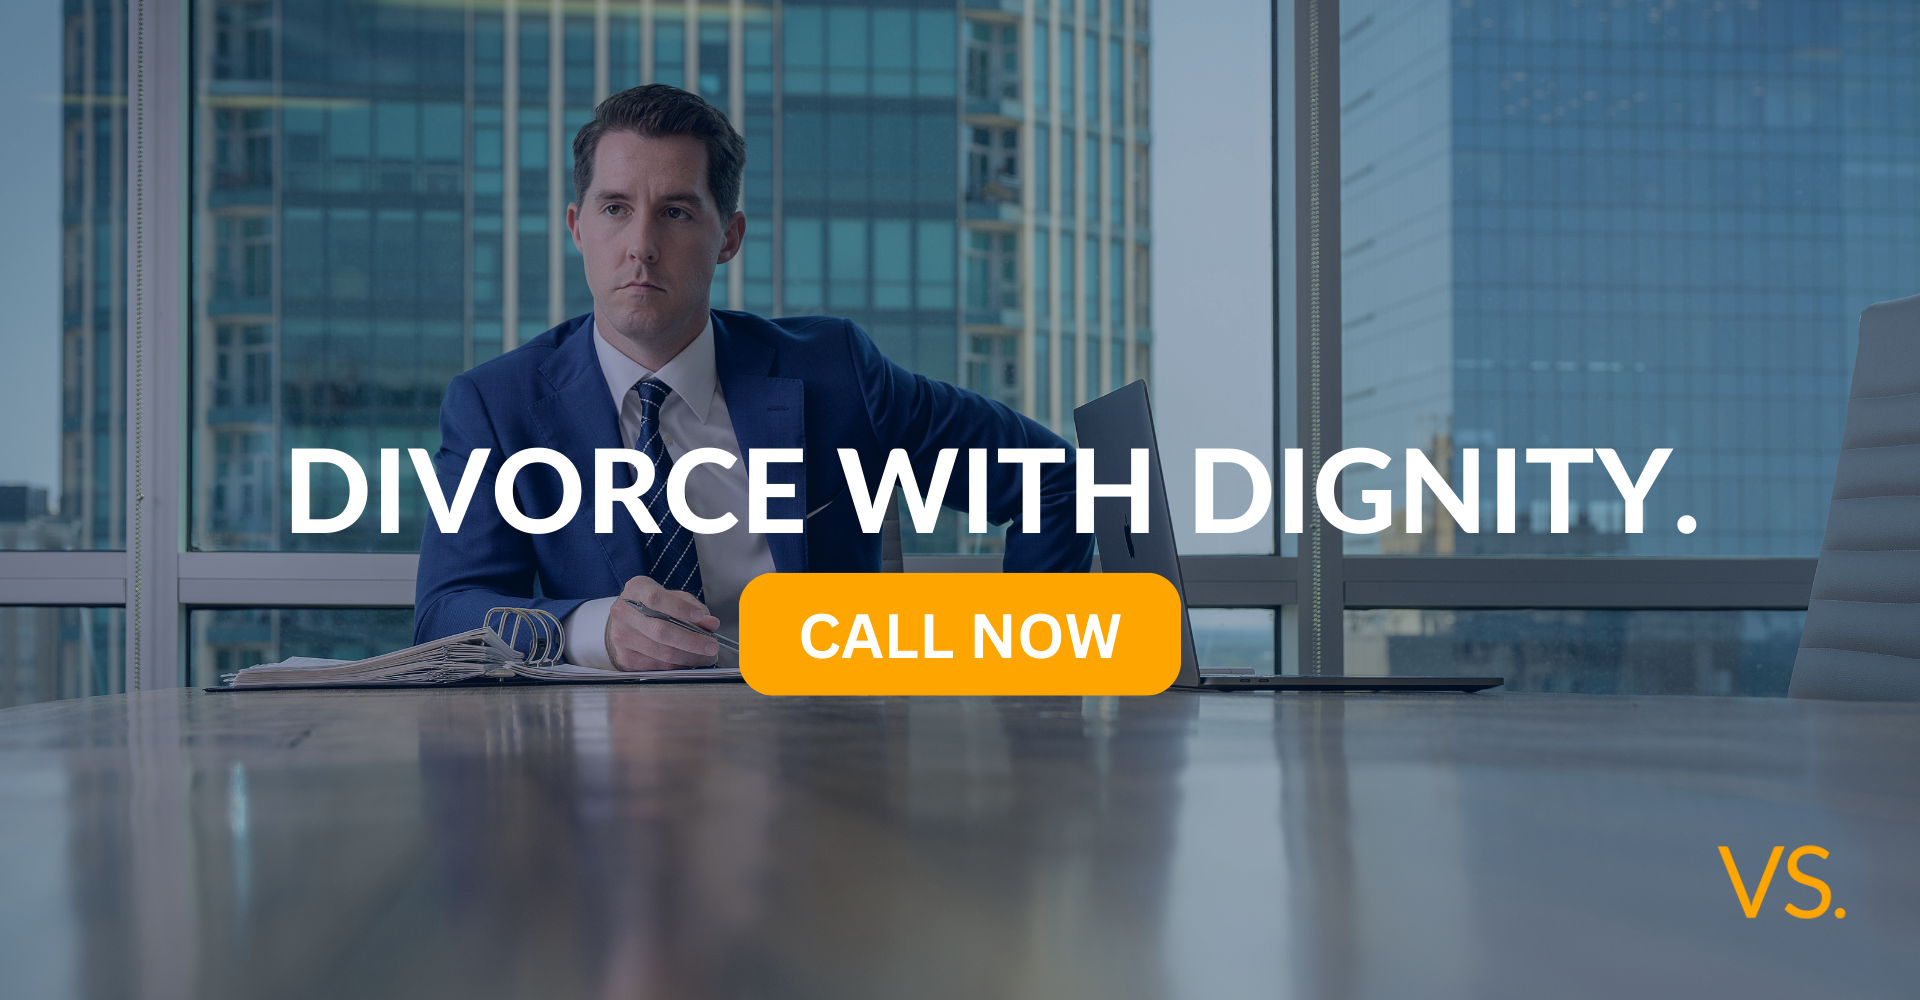 Our top divorce lawyers help you divorce with dignity.